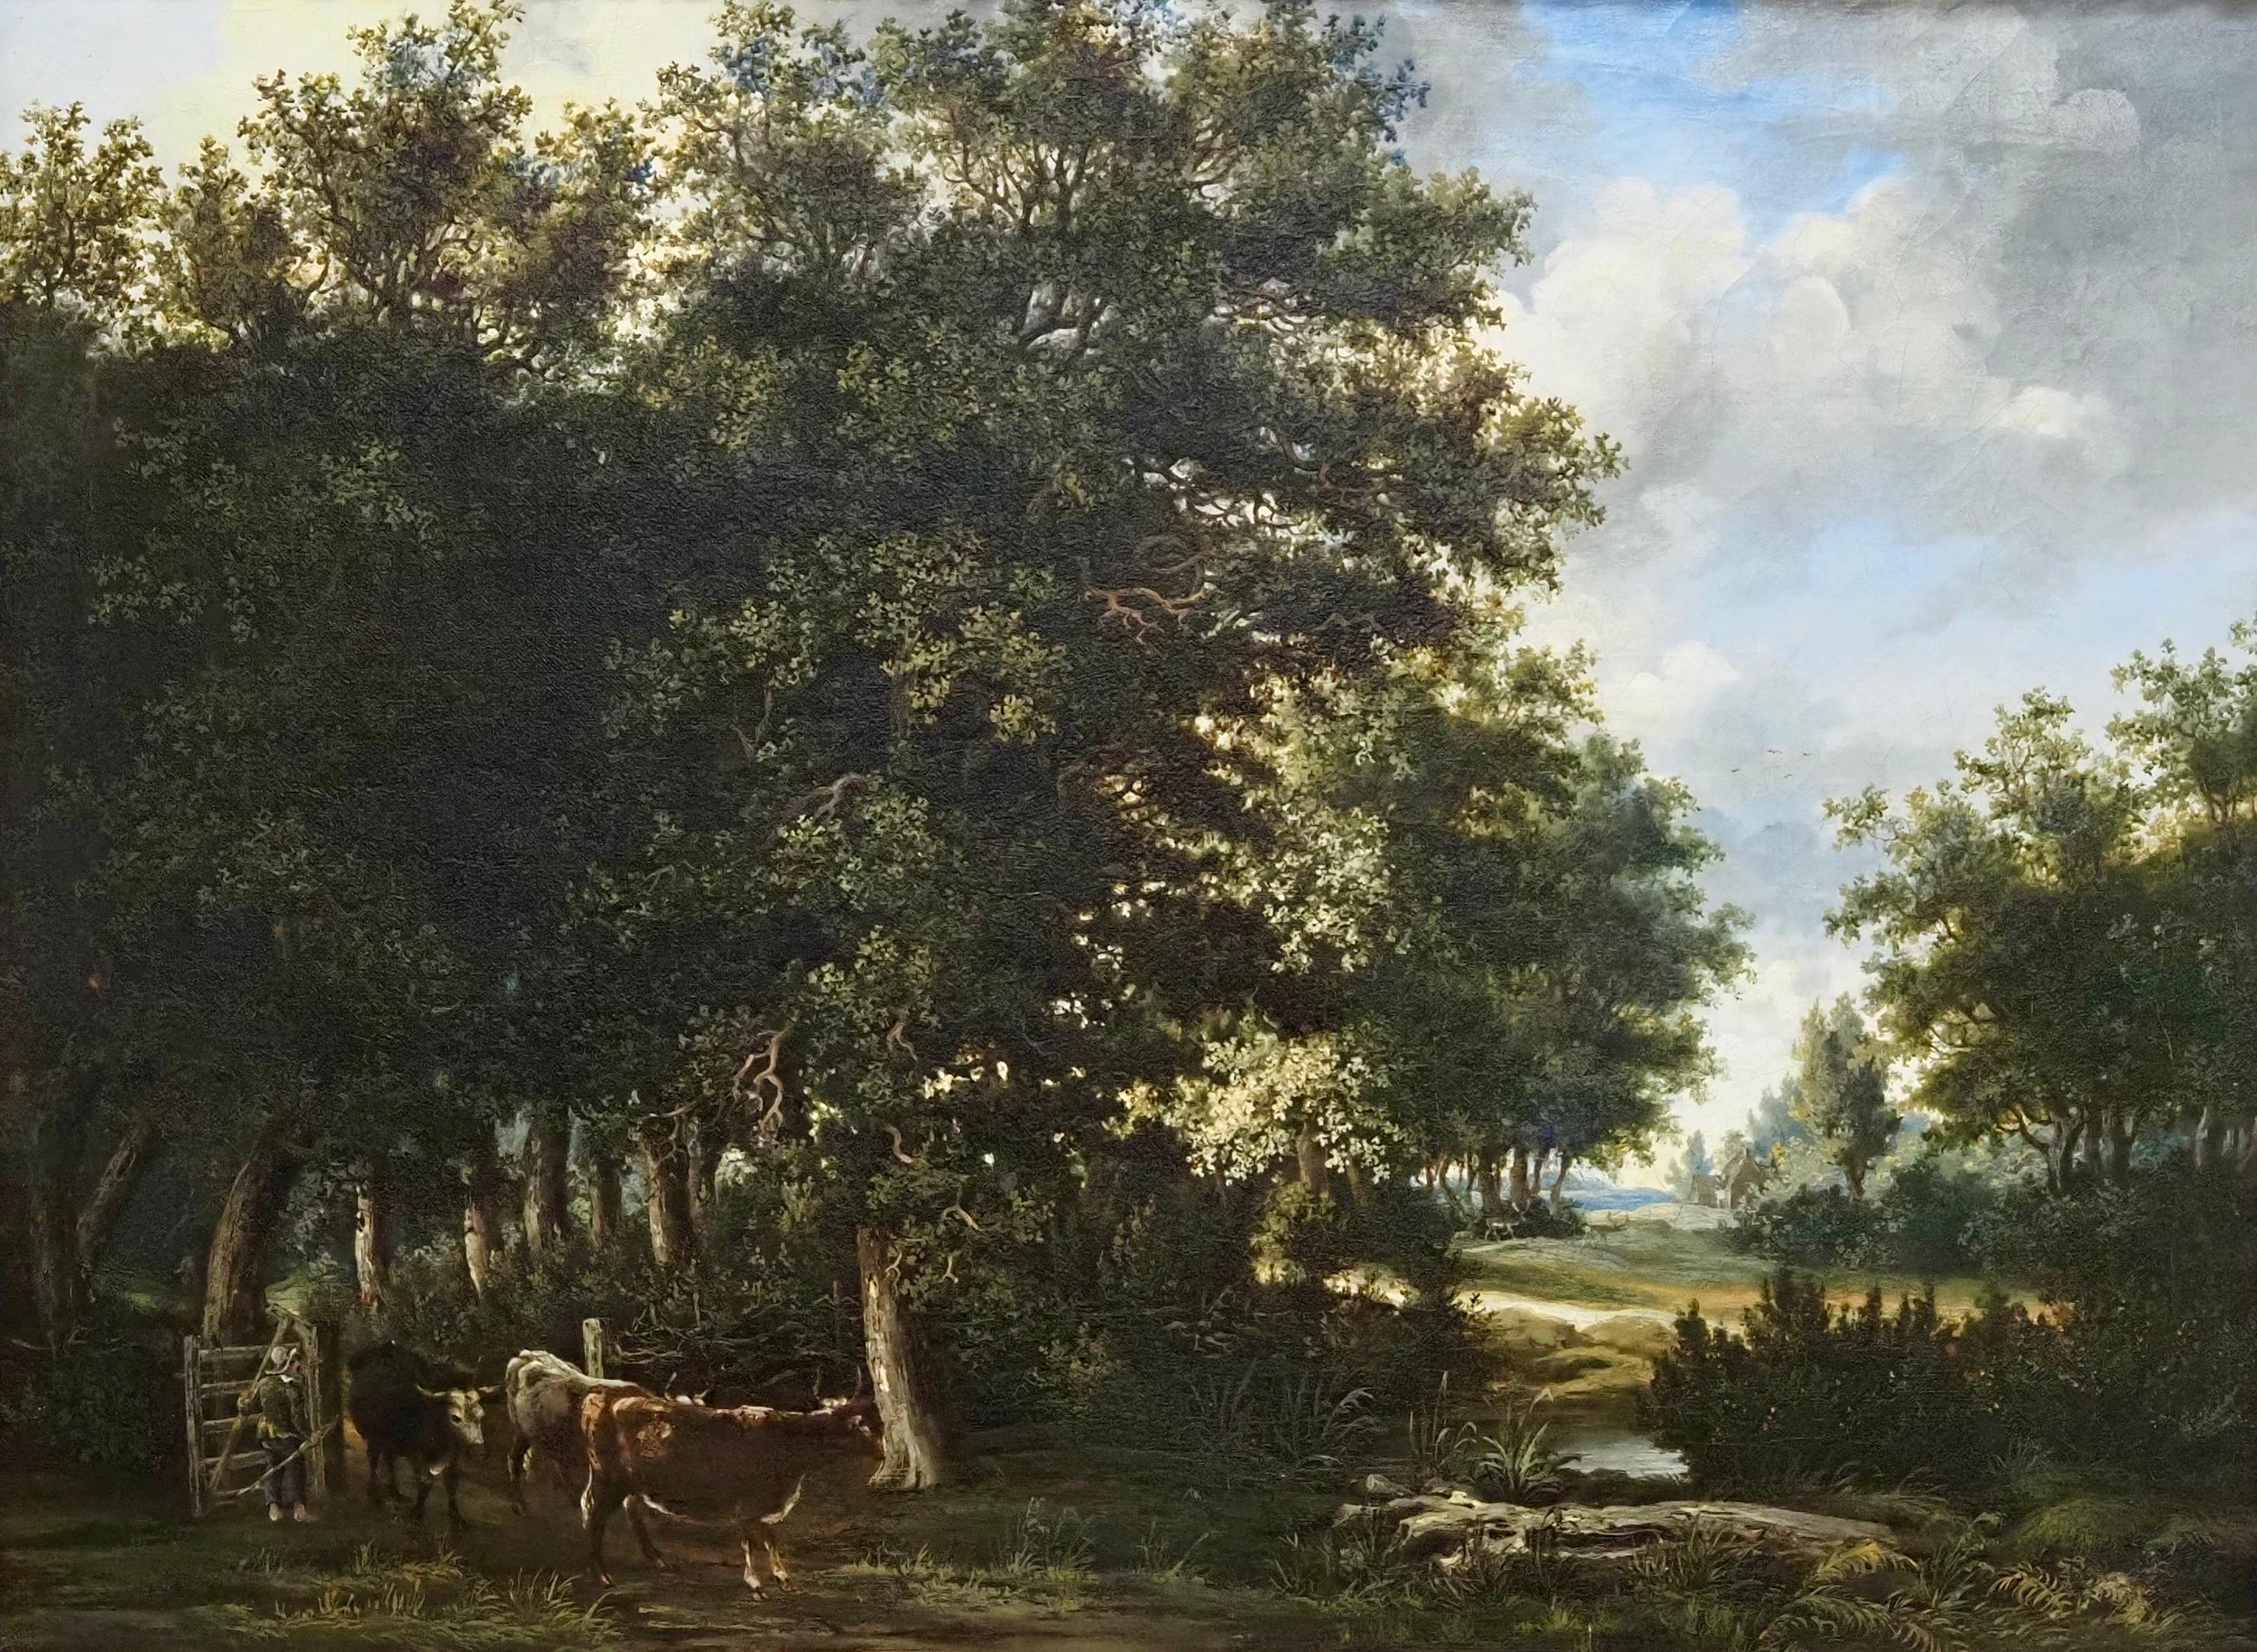 Herding cattle through a wooded river landscape - Painting by James Stark